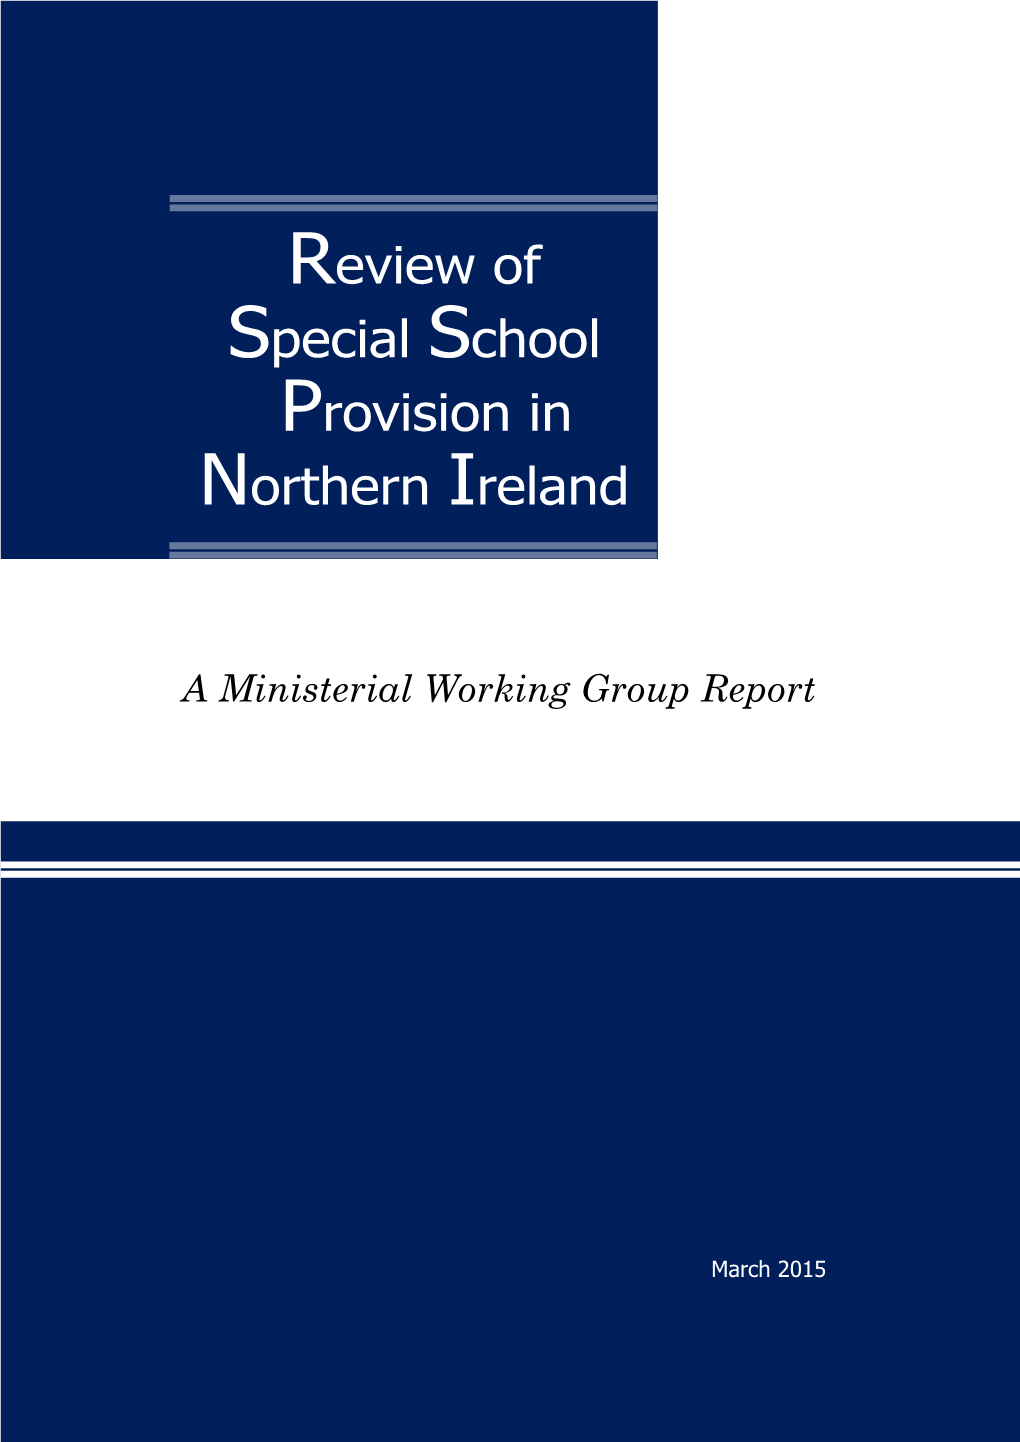 Review of Special School Provision in Northern Ireland